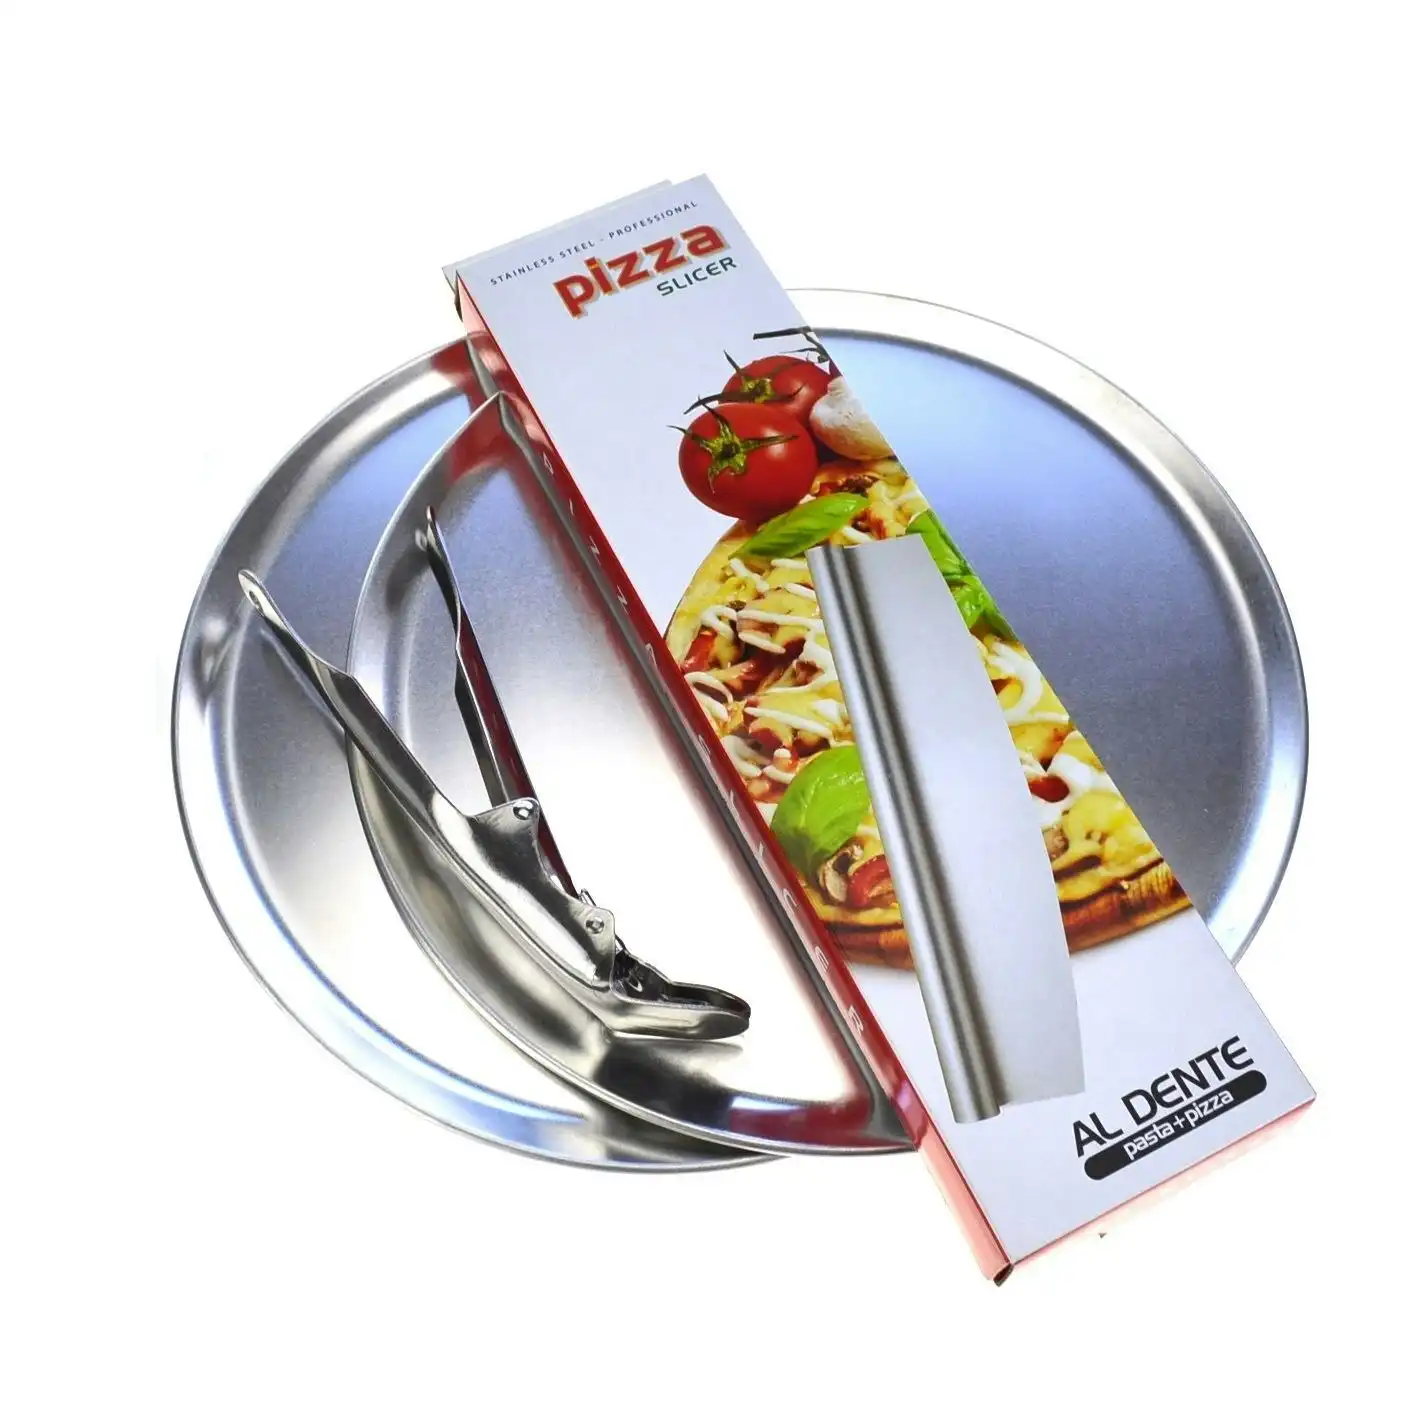 Appetito Pizza Flat Pack   2 X 300mm Pizza Plates And Rocking Pizza Cutter + Pizza Gripper